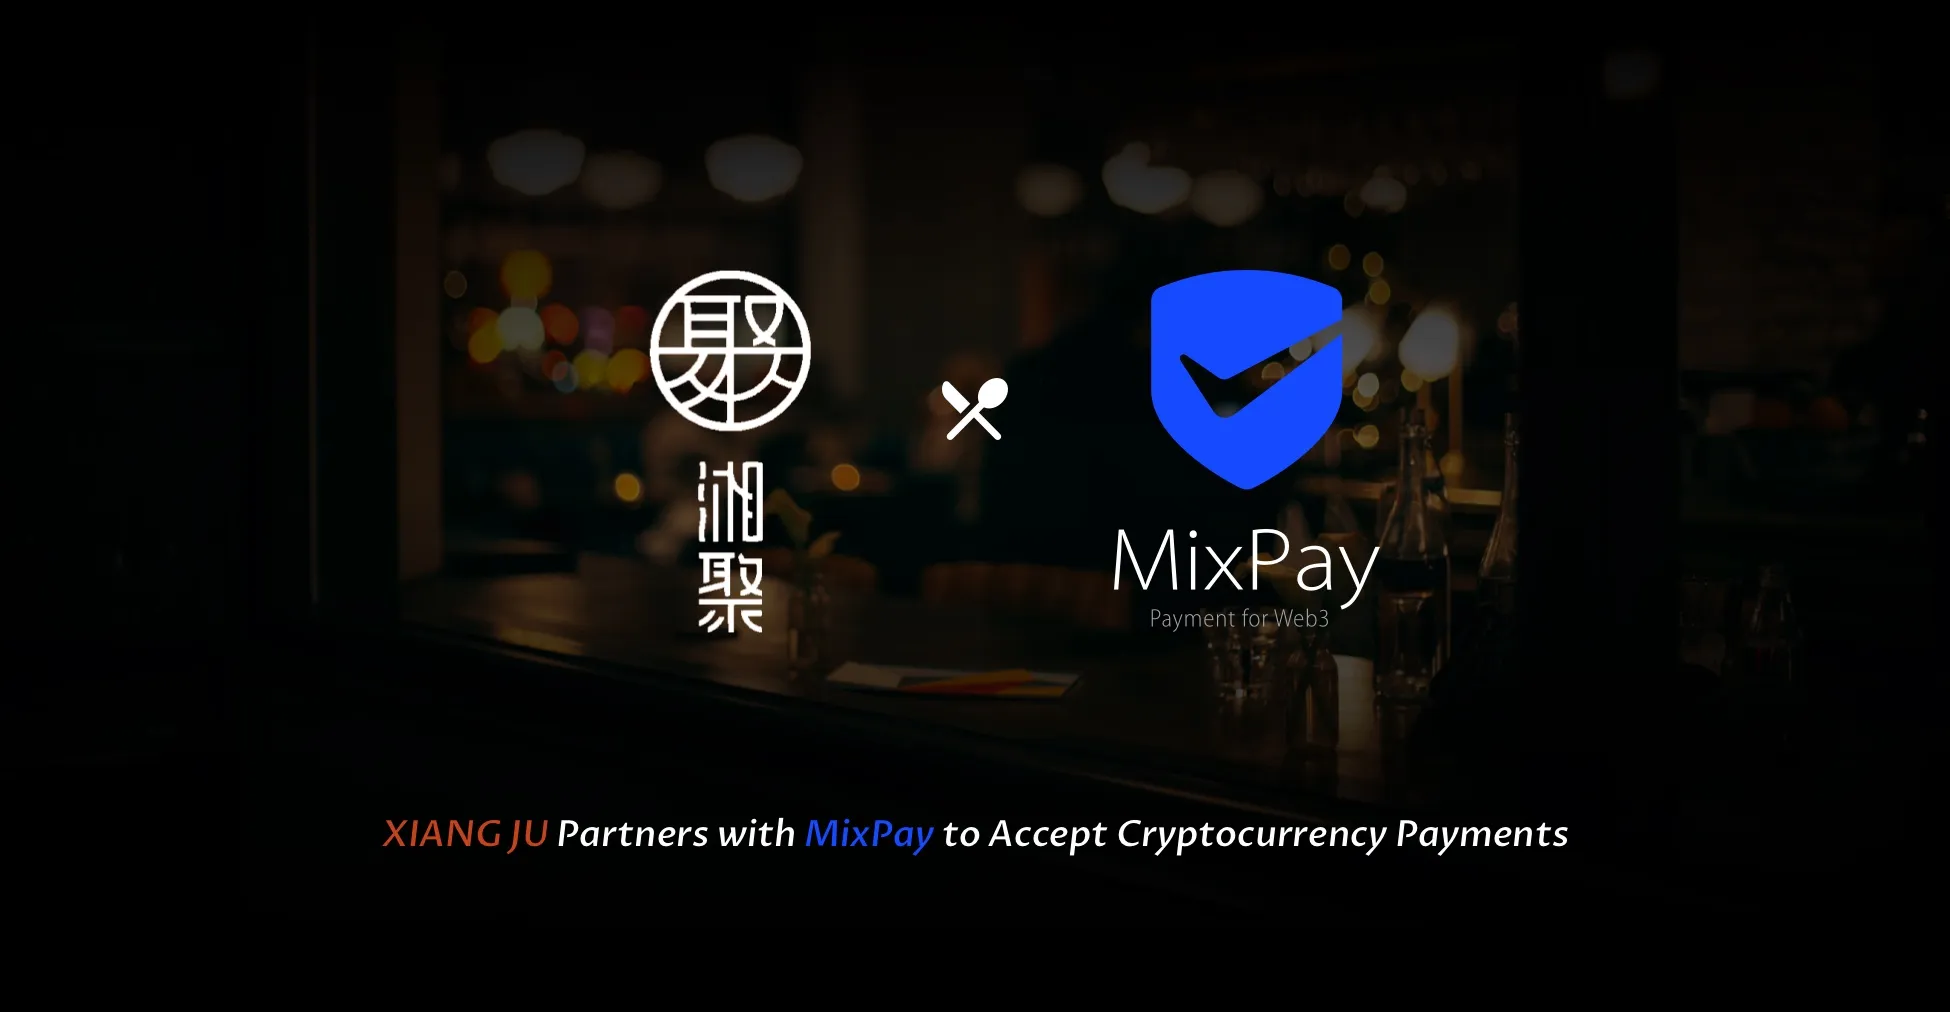 Accept Cryptocurrency Payments